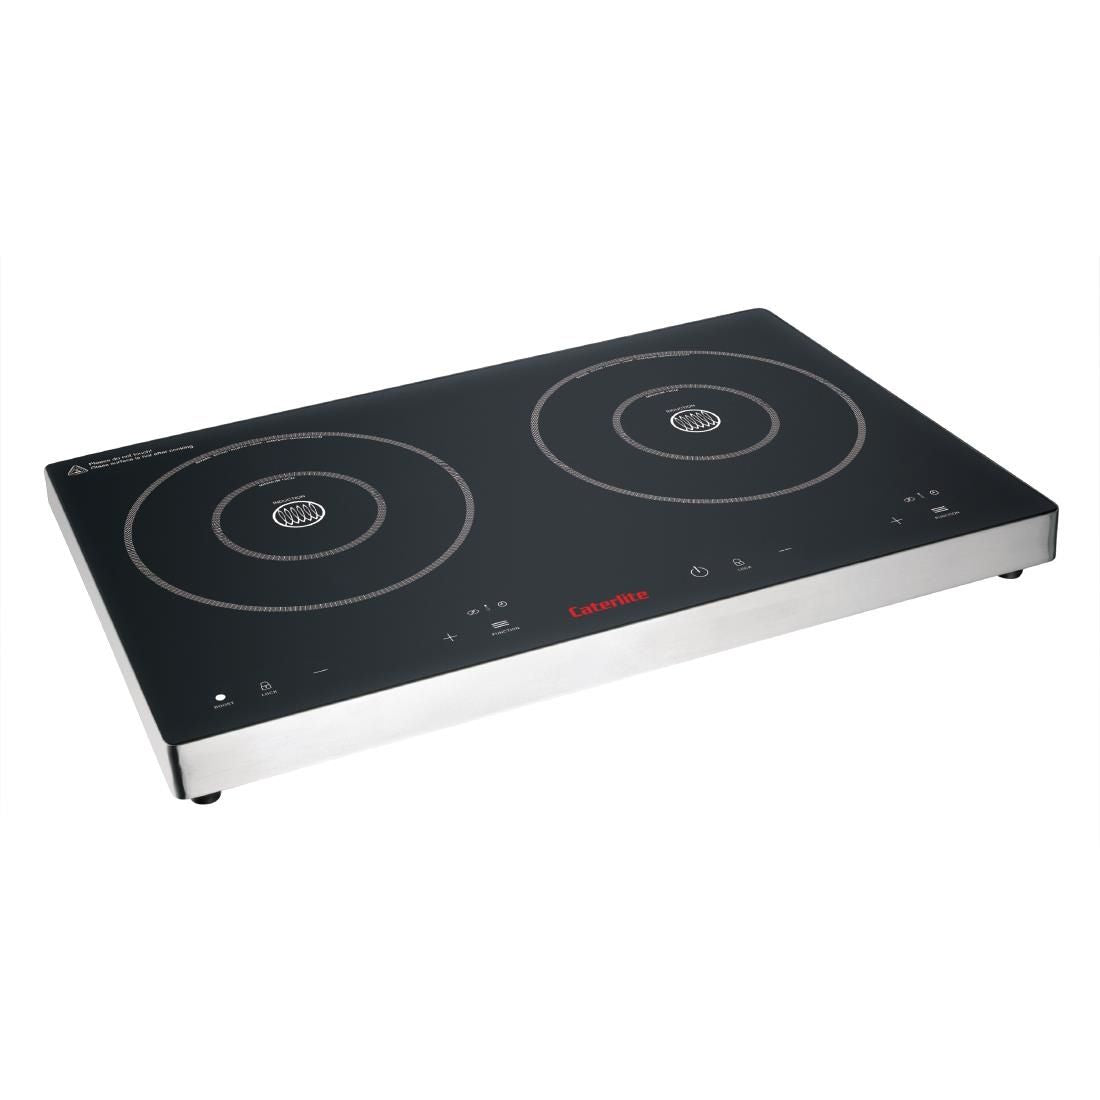 Caterlite Touch Control Double Induction Hob - DF824 Induction Hobs Caterlite   